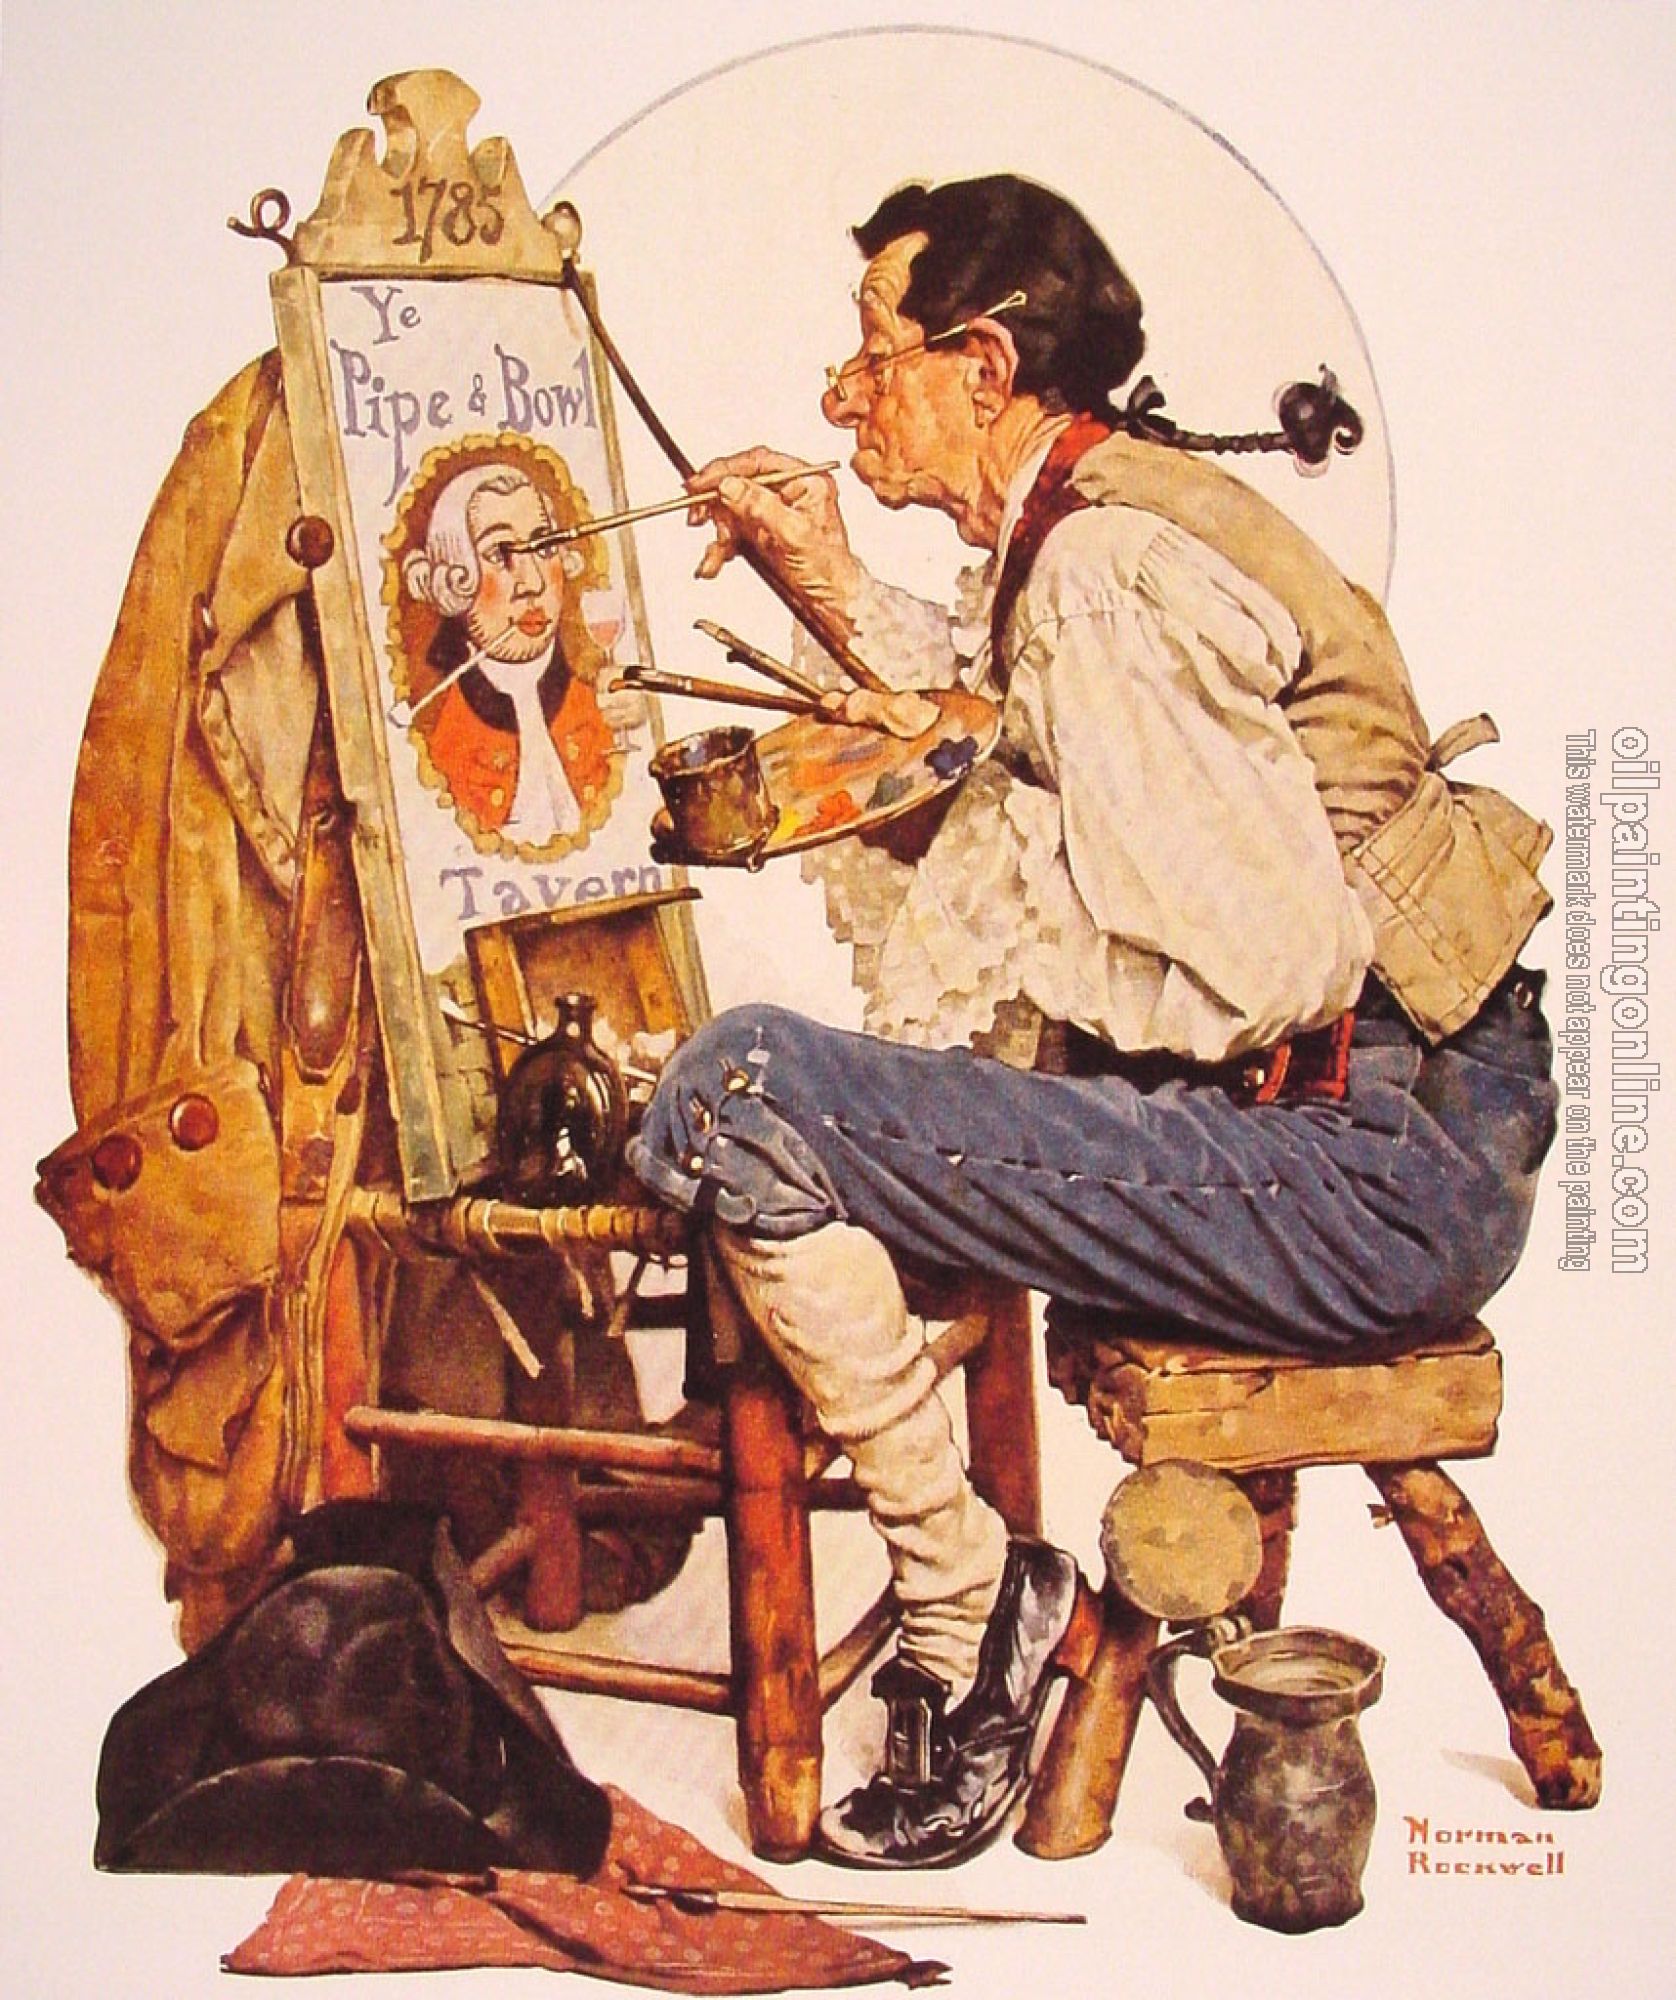 Rockwell, Norman - Pipe and Bowl sign Painter